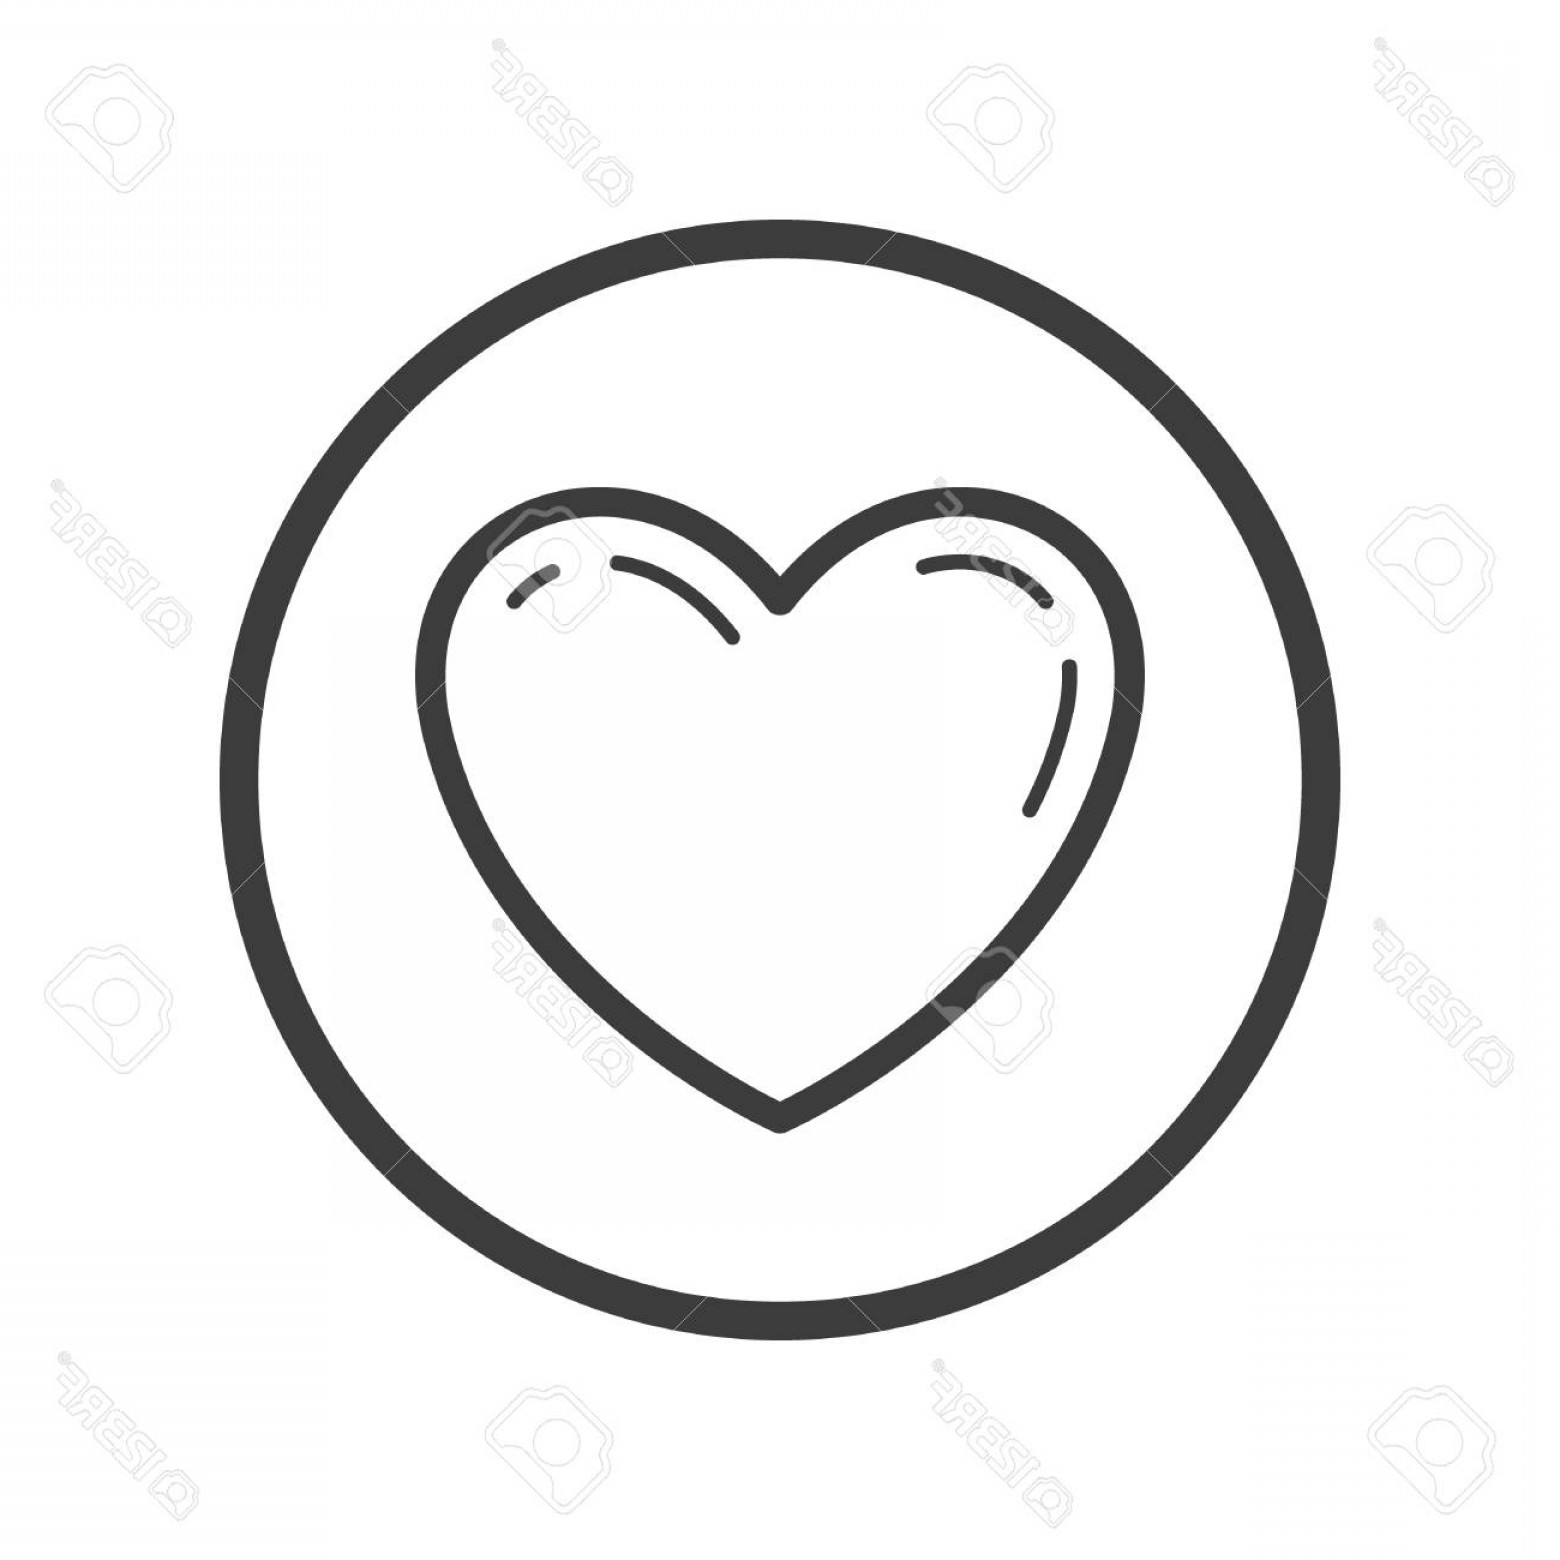 Photostock Vector Black And White Line Art Heart Icon In The Round.